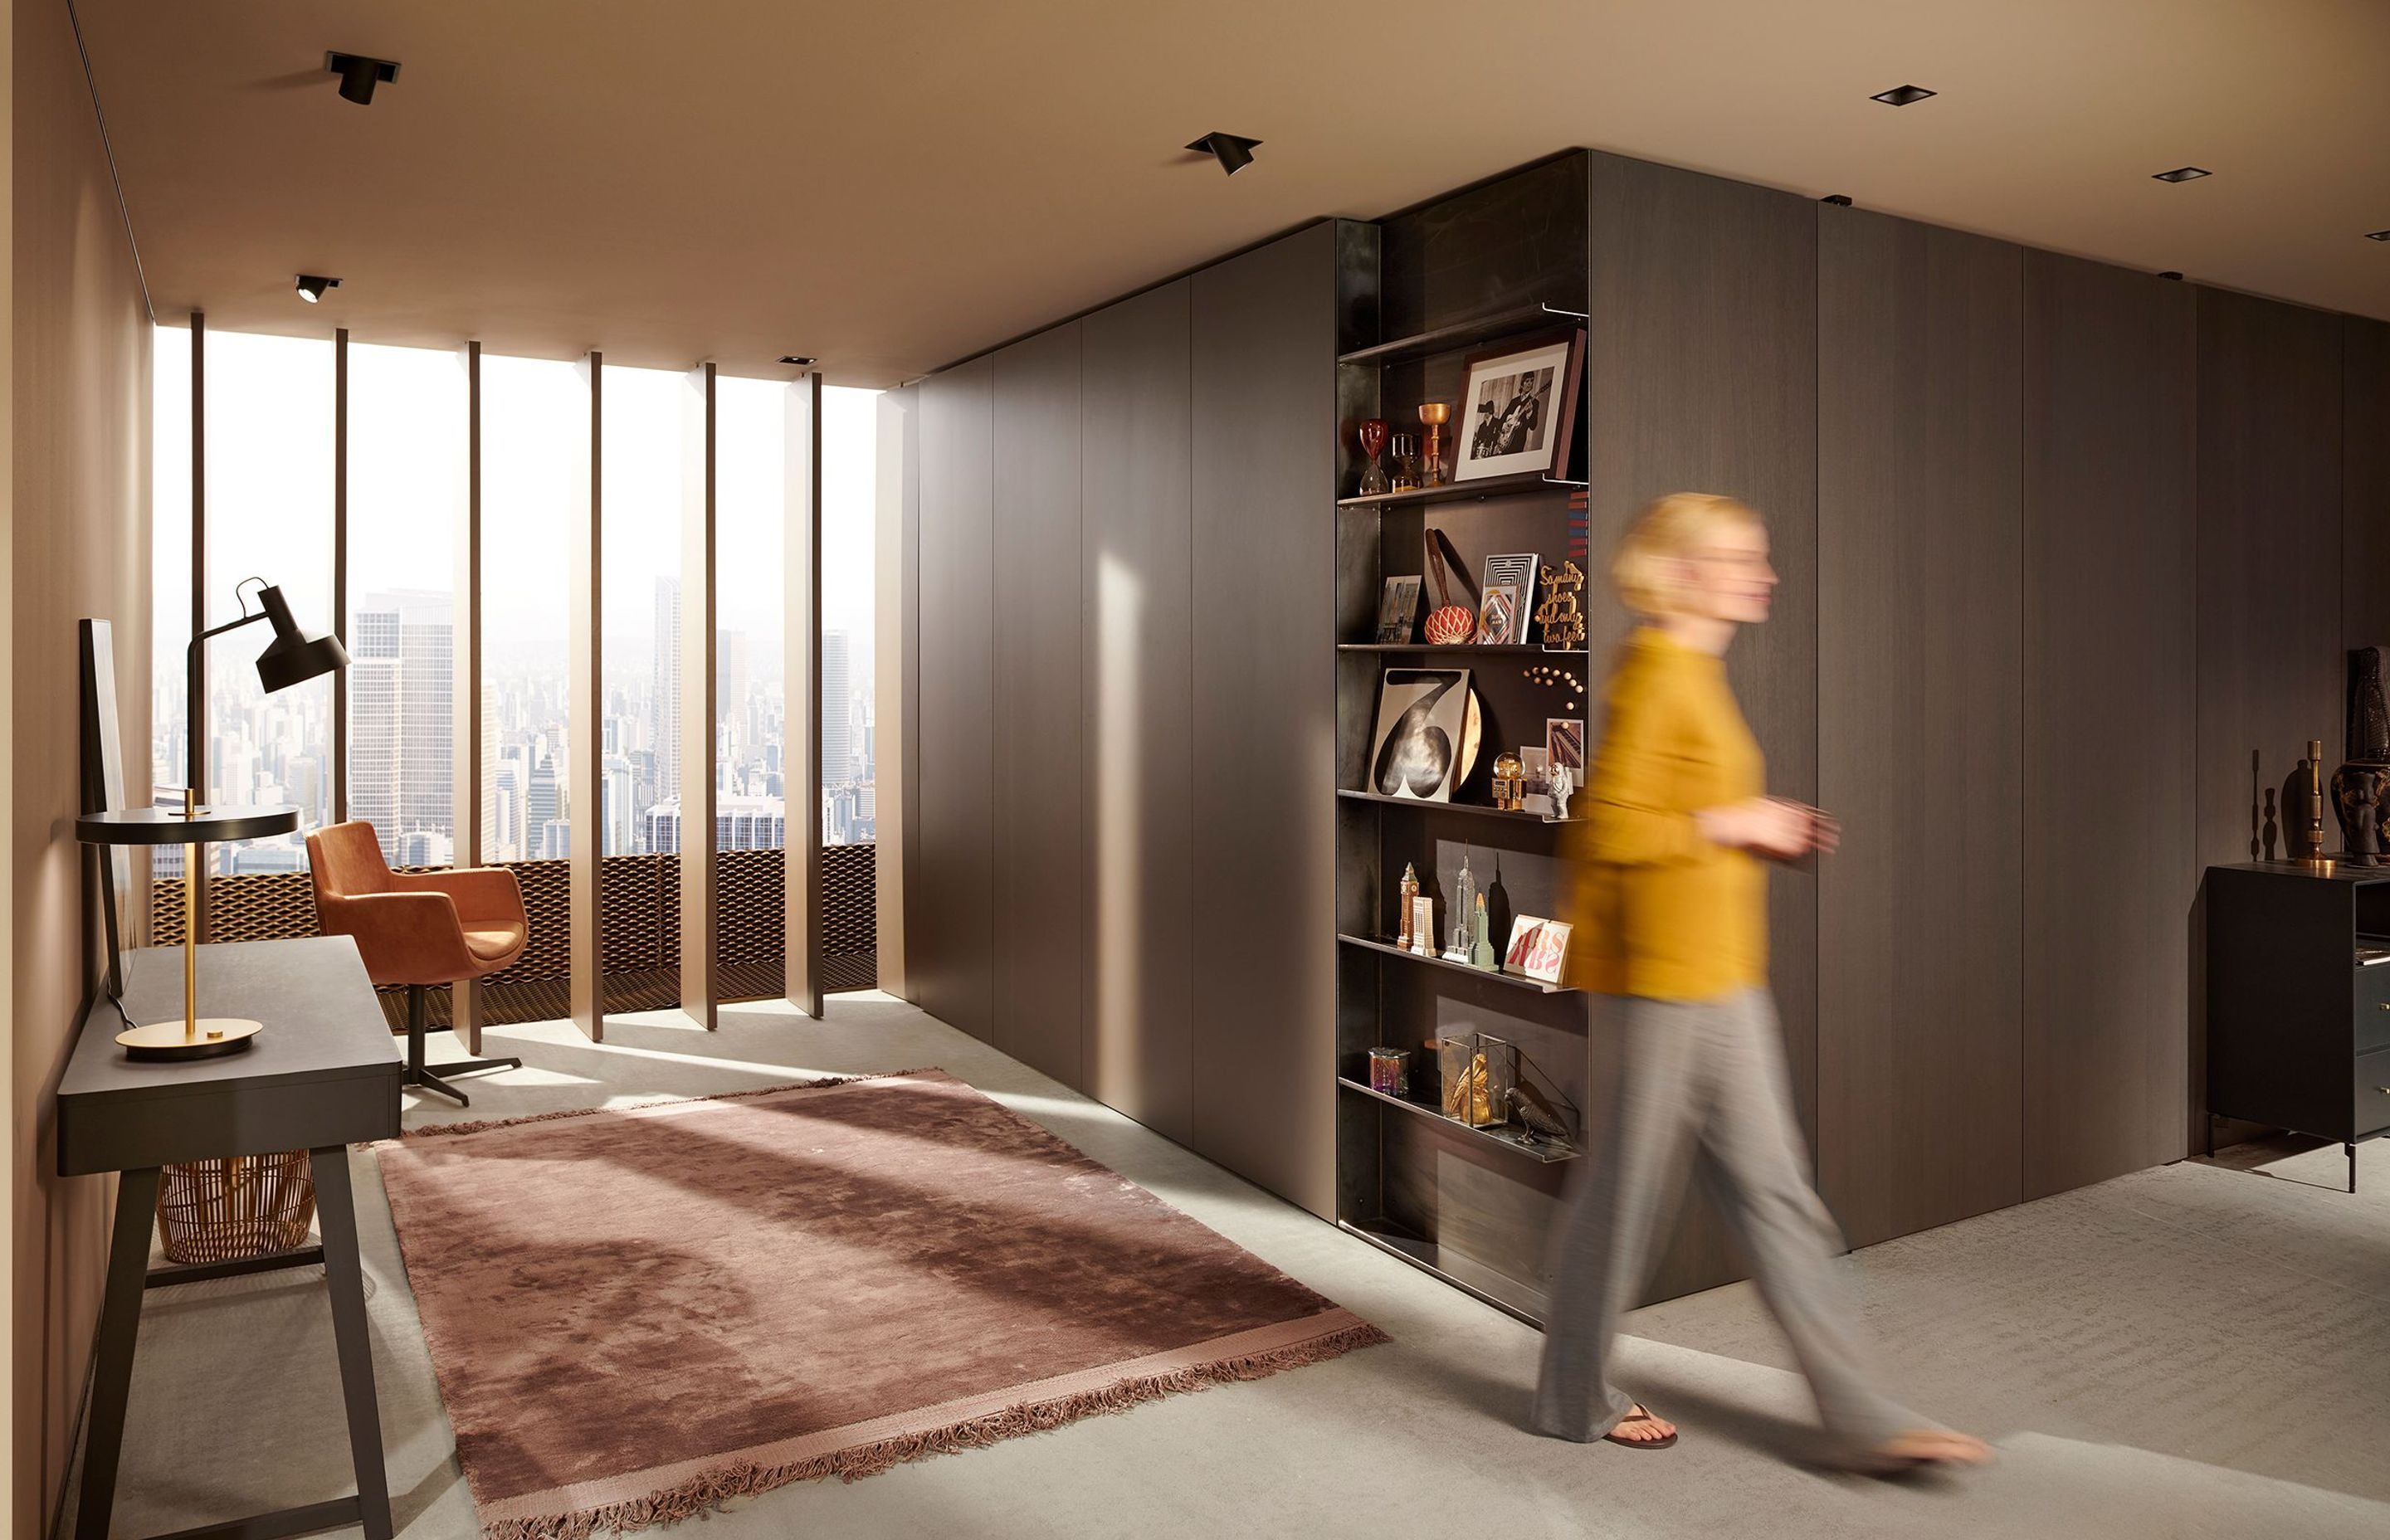 REVEGO provides new opportunities for creating multifunctional spaces – allowing you to open up entire living areas when you need them, and conceal them again when they are not in use.